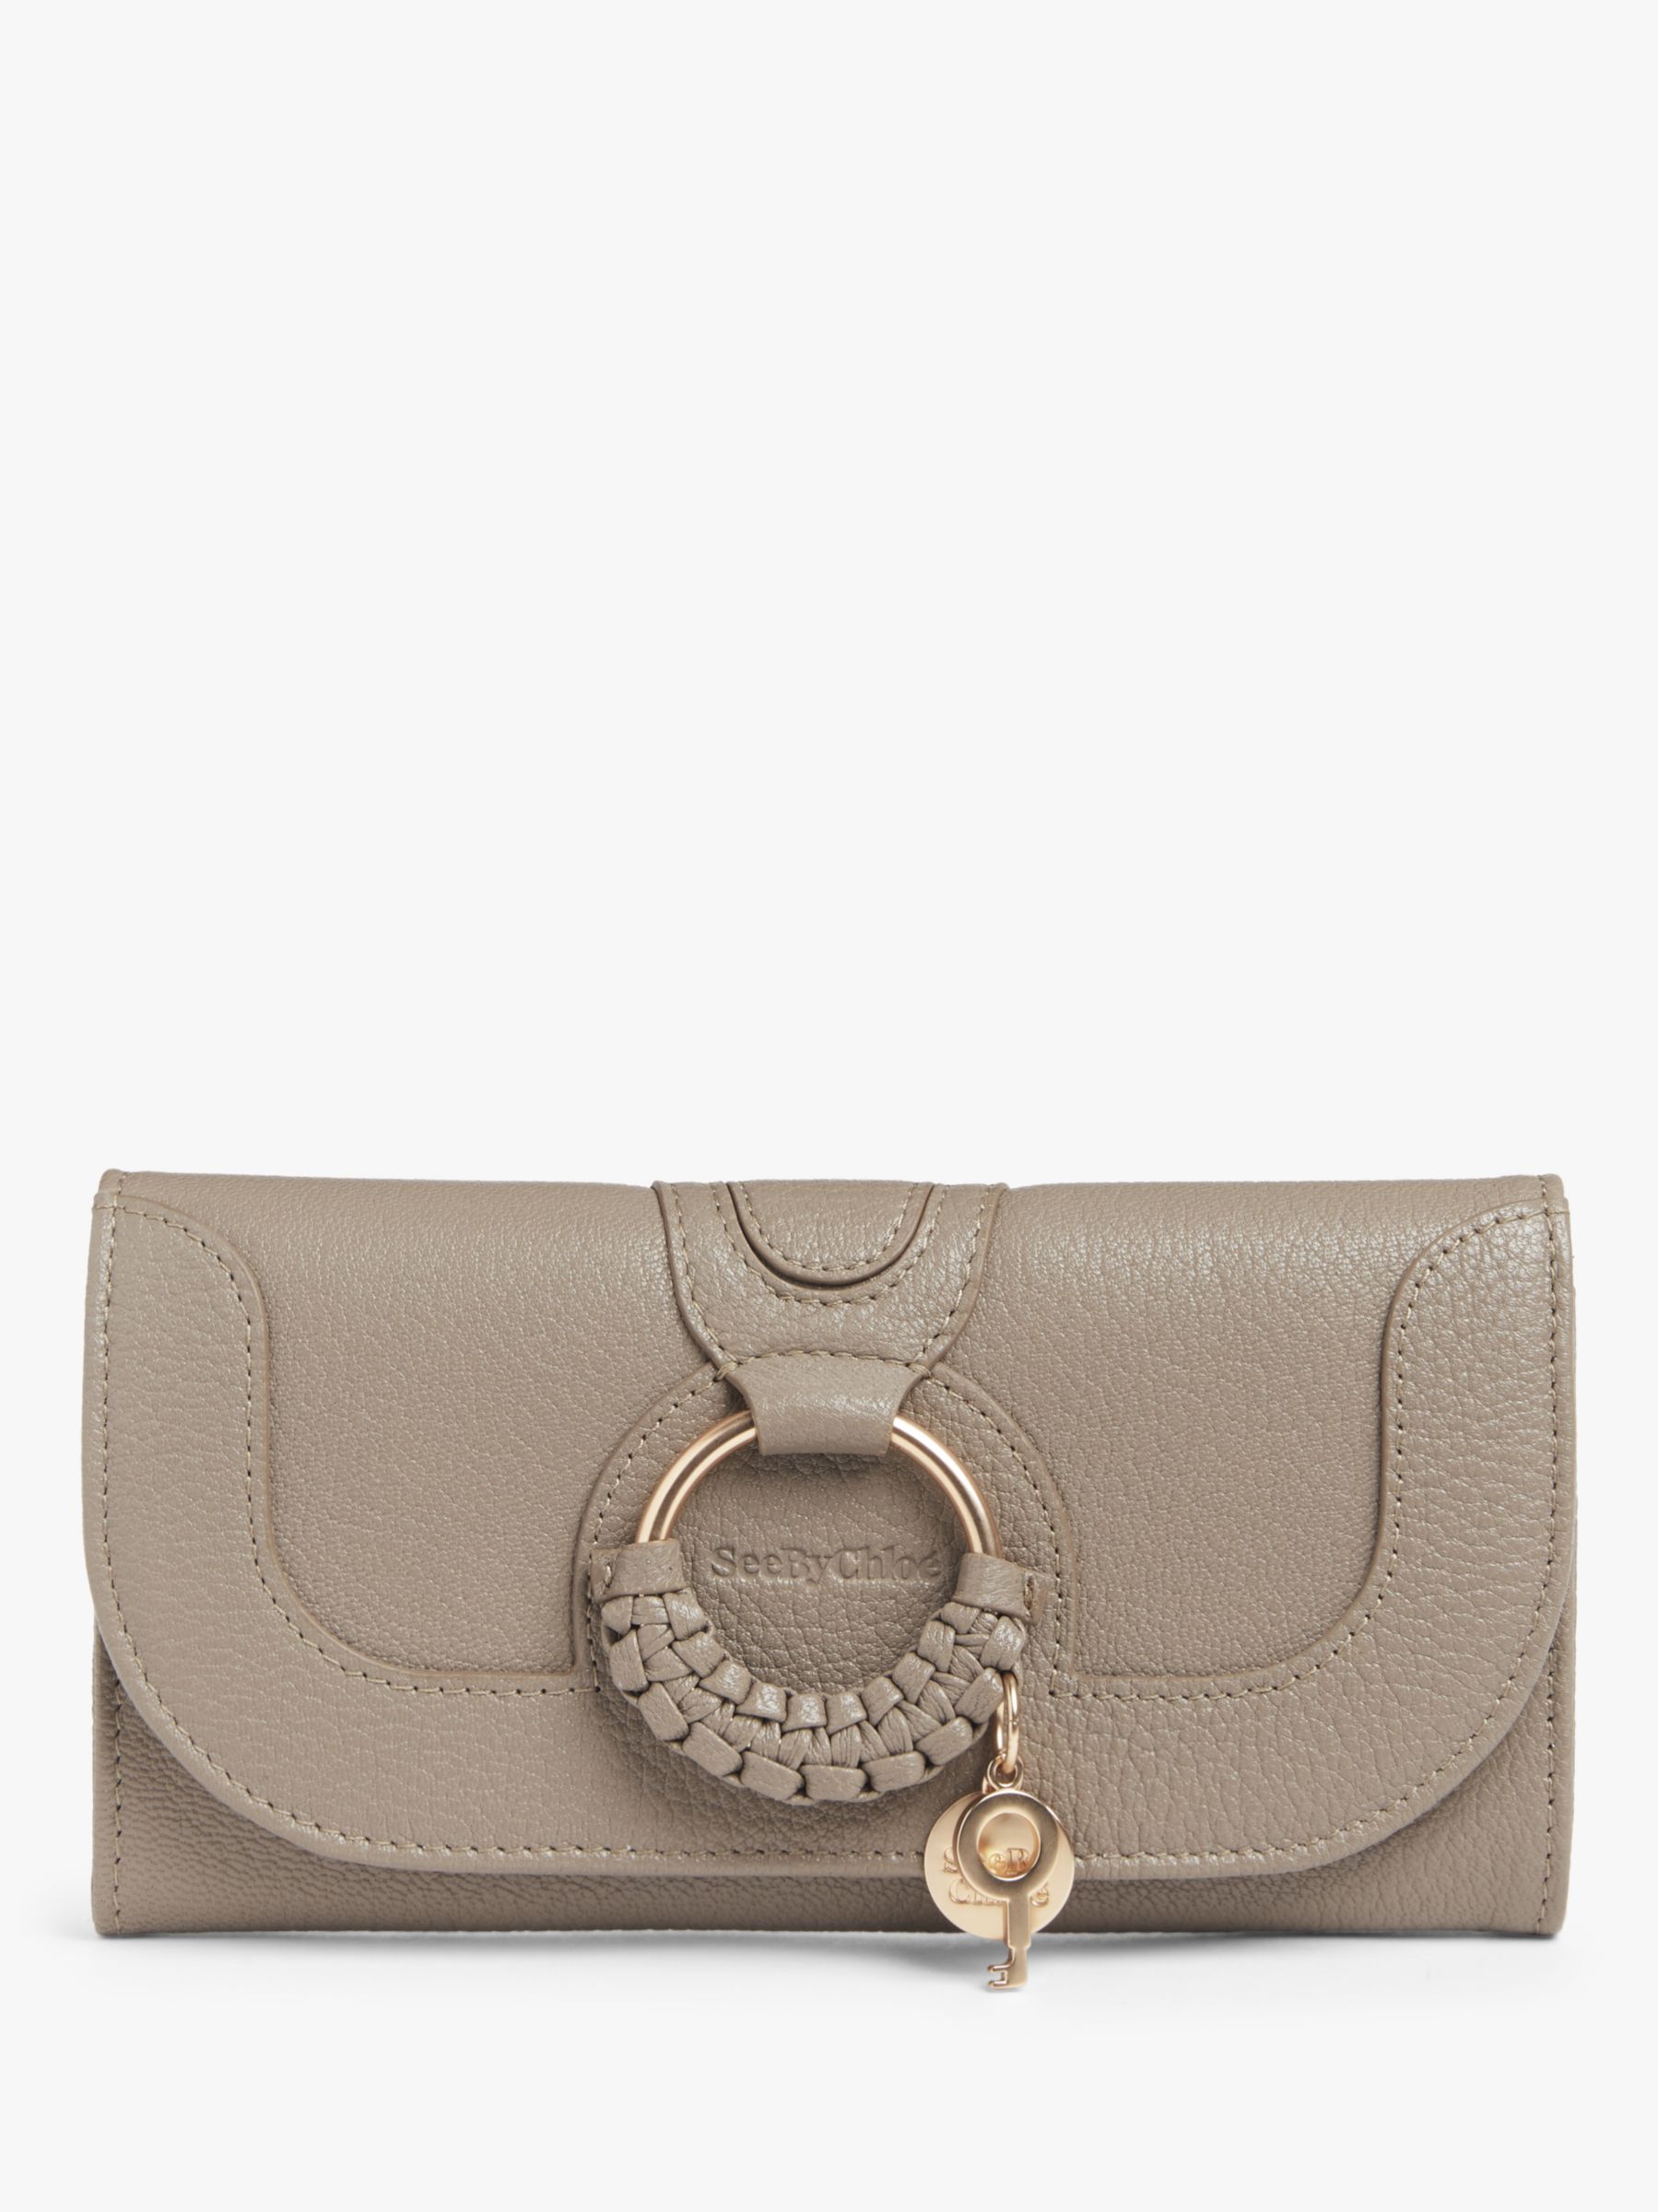 Buy See By Chloé Hana Large Leather Purse Online at johnlewis.com